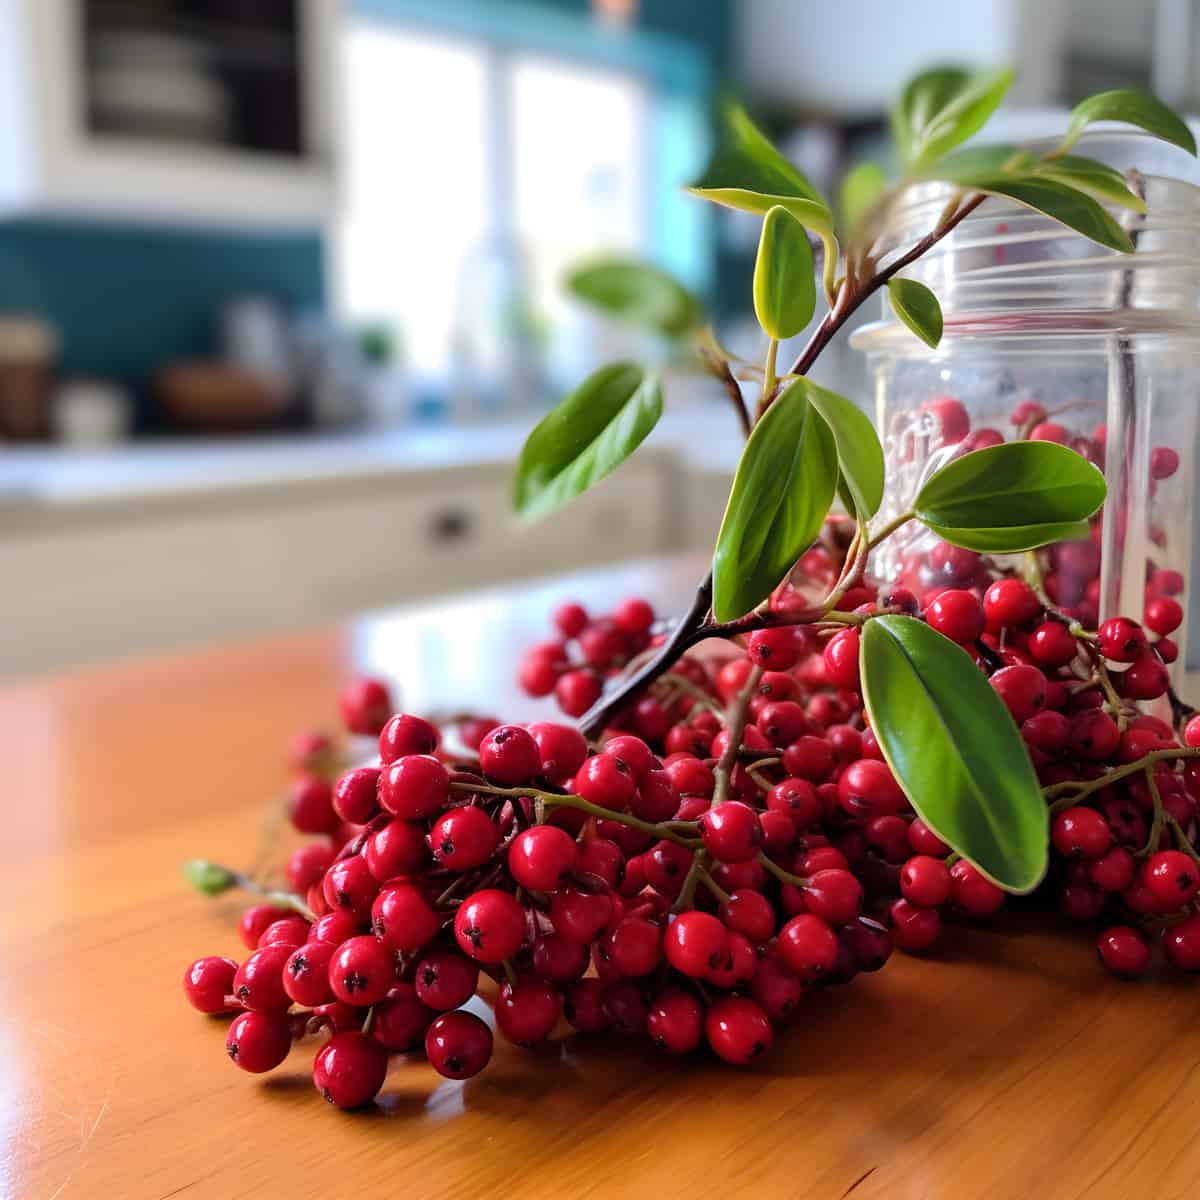 Smallleaved Myrtle Berry on a kitchen counter